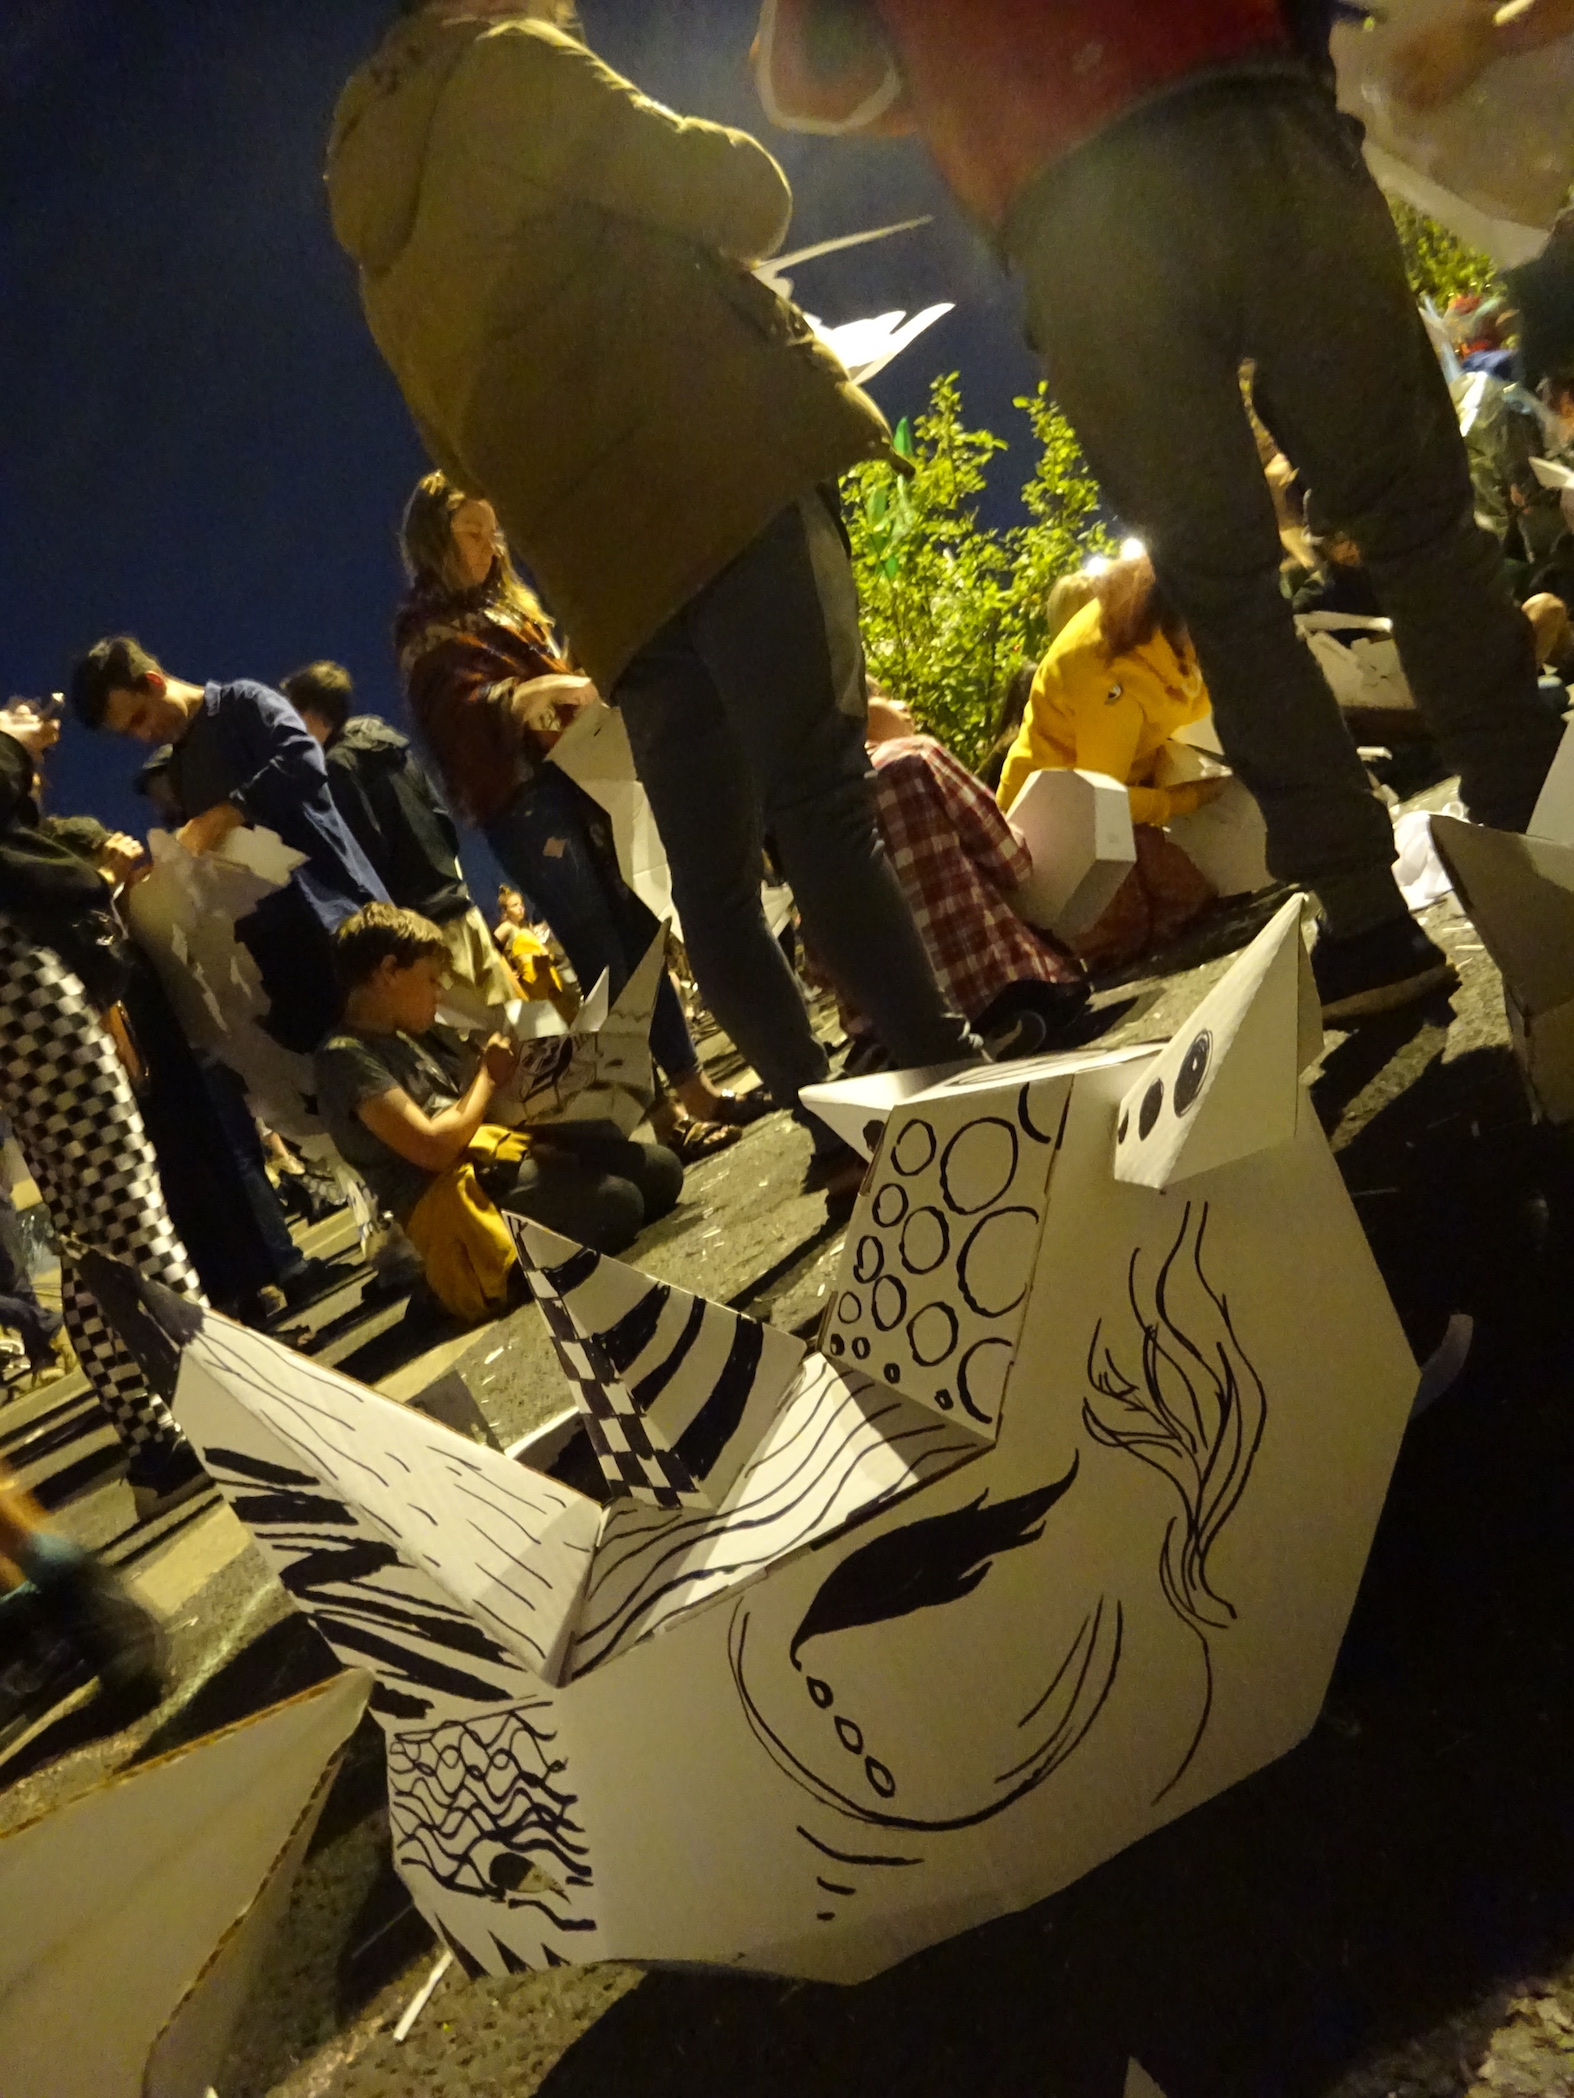 A white card rhino mask, decorated with patterns in black pen. It is on the ground, with people behind it decorating their own masks.